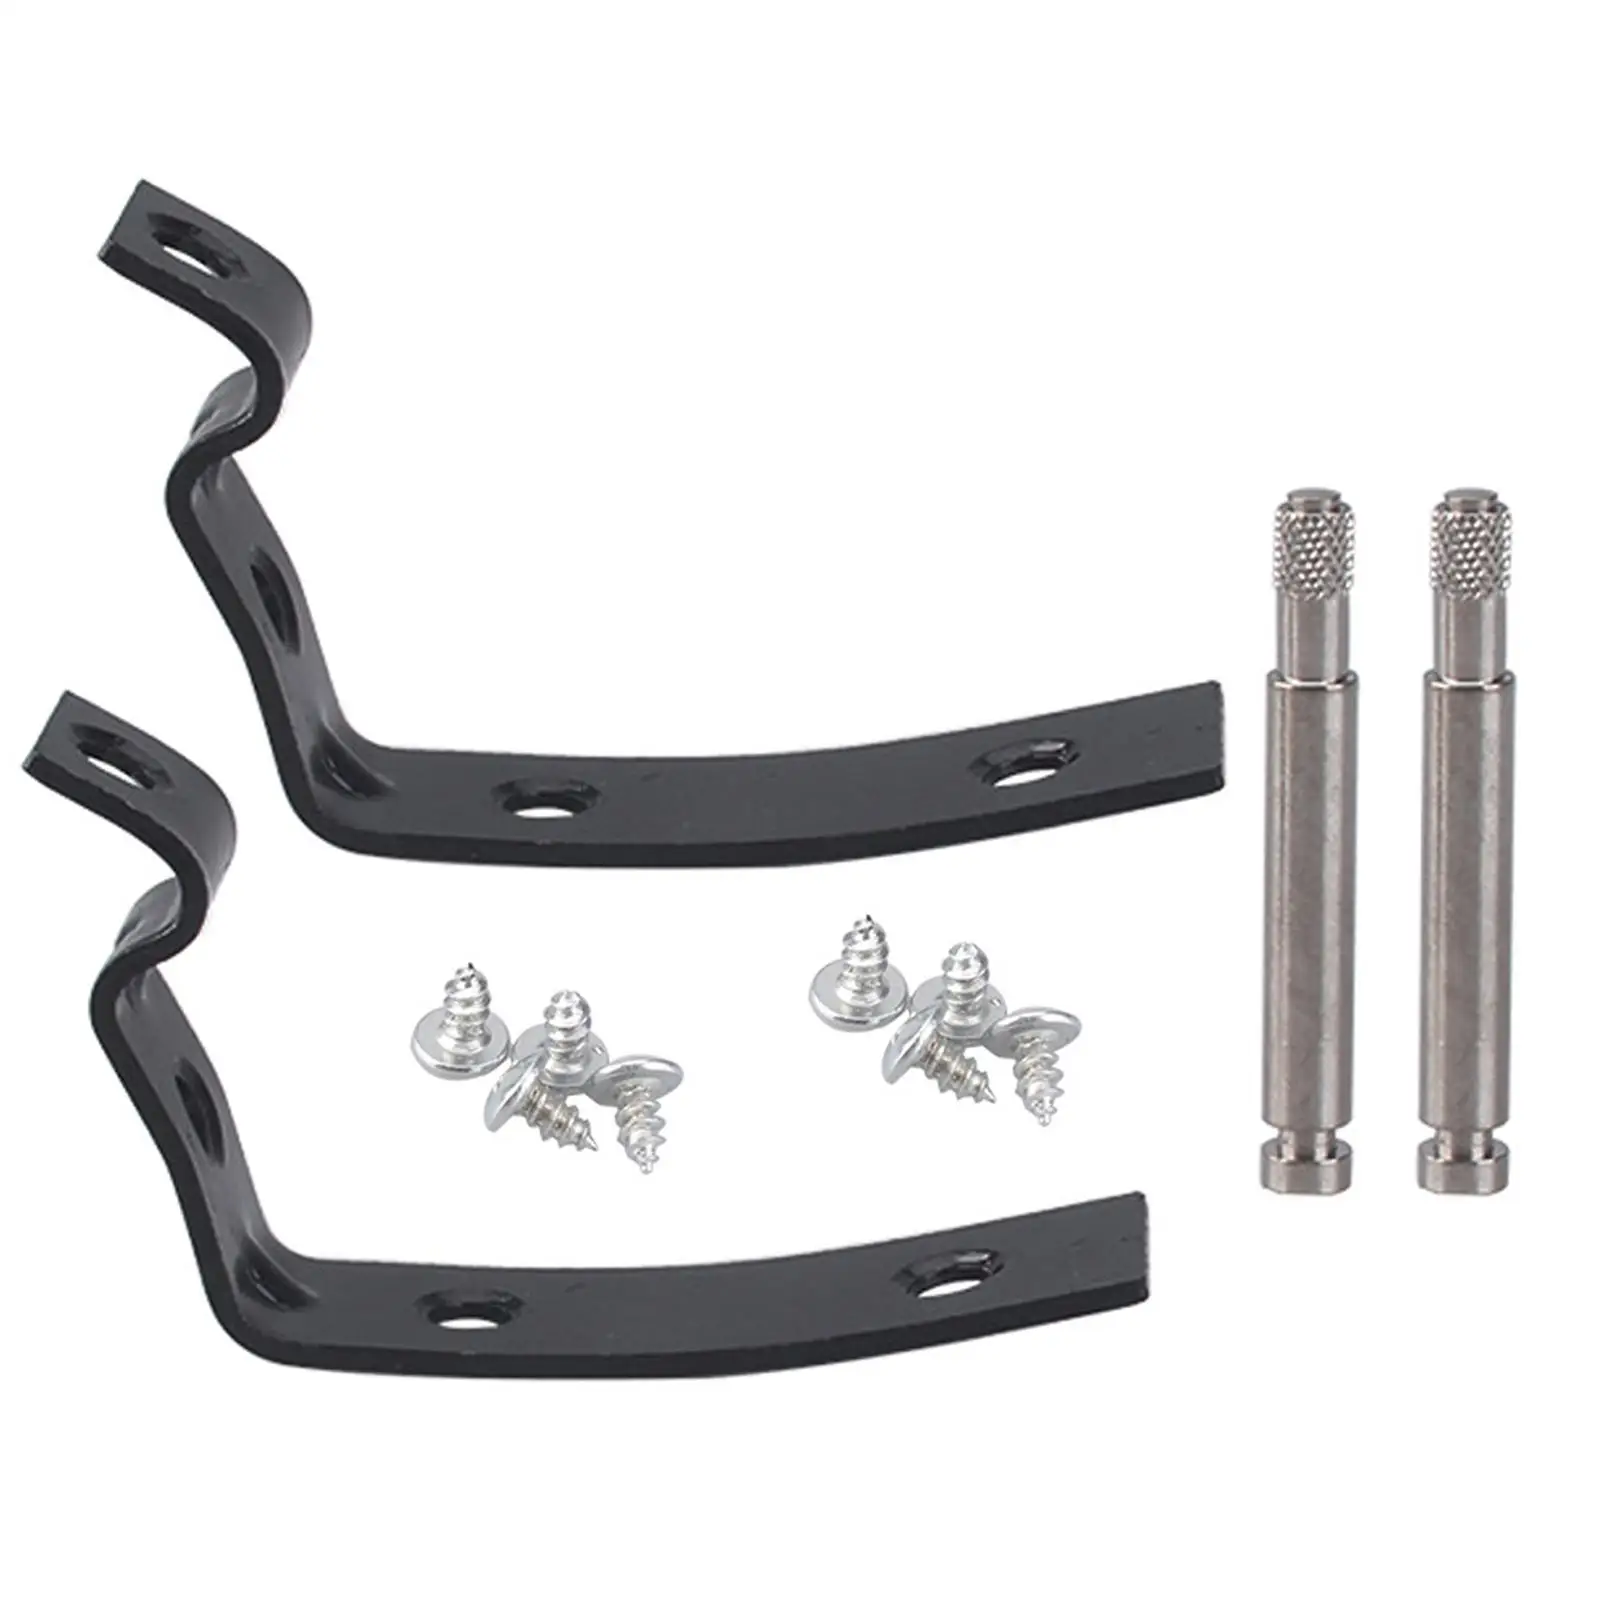 Car Glove Box Hinge Bracket Repair Kit Stainless Steel Mounting Replacement for Audi A4 S4 RS4 B6 B7 8E2857131 8E2857035